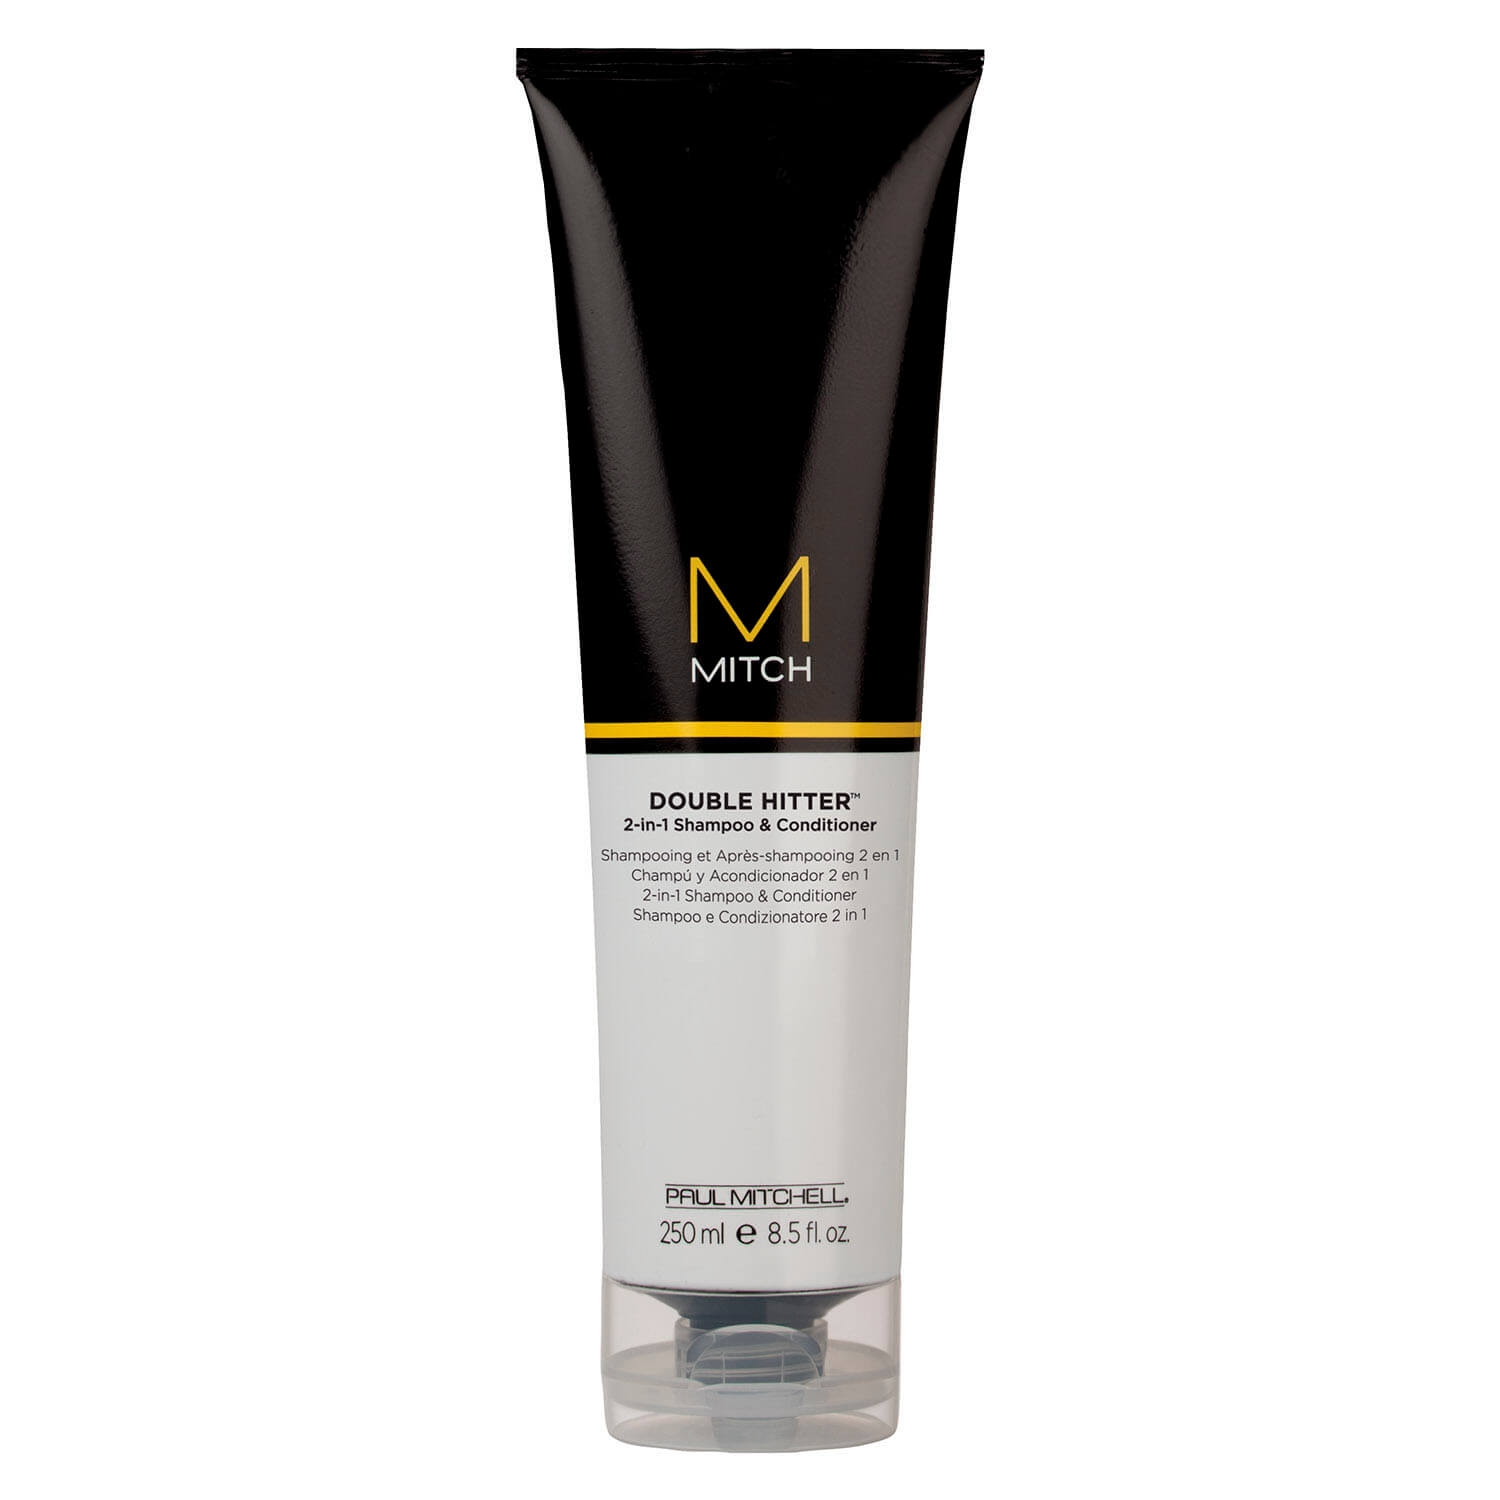 Product image from Mitch - Double Hitter 2-1 Shampoo & Conditioner